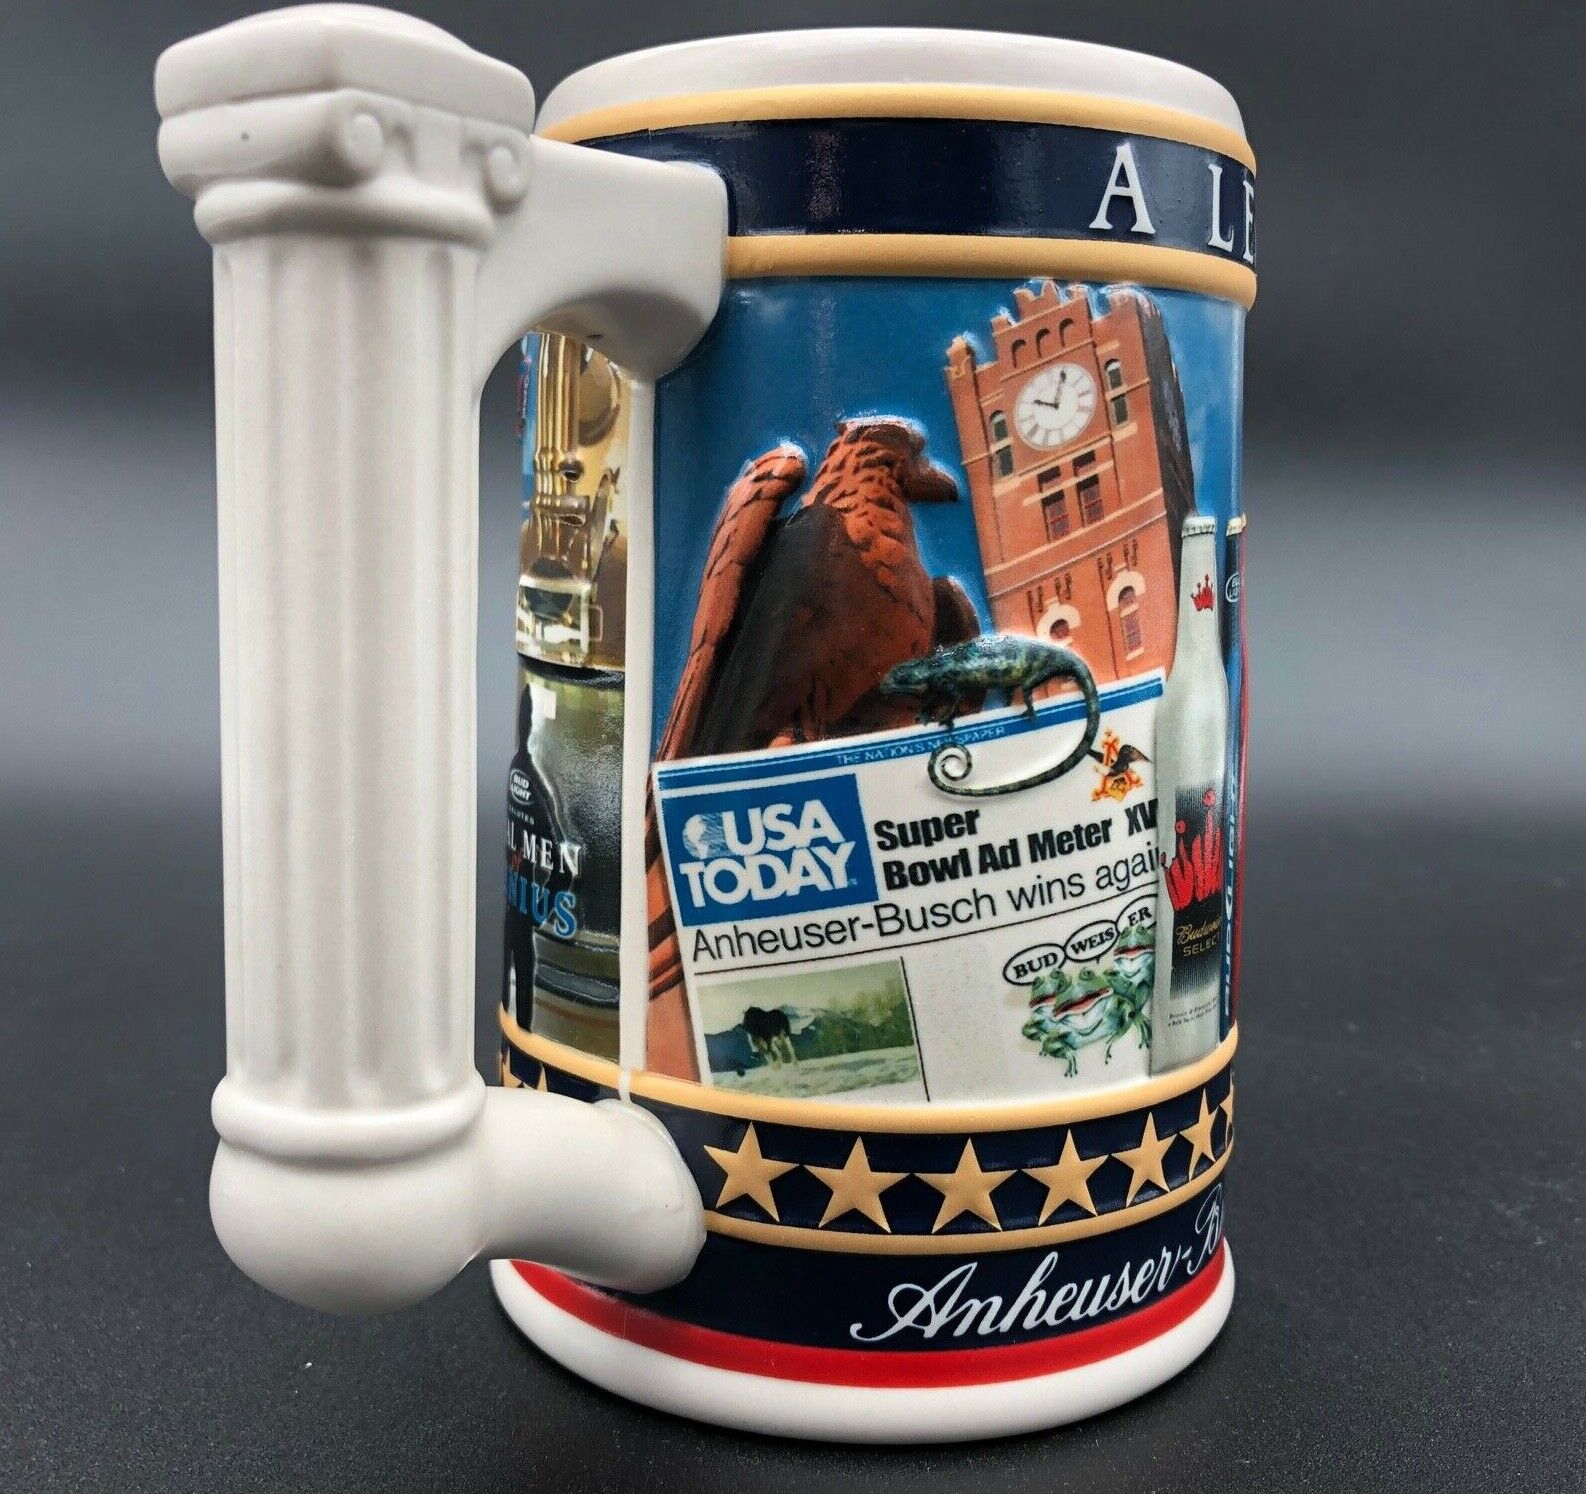 Anheuser-Busch Family Series Hand Crafted 2007 State Convention Beer Stein #6